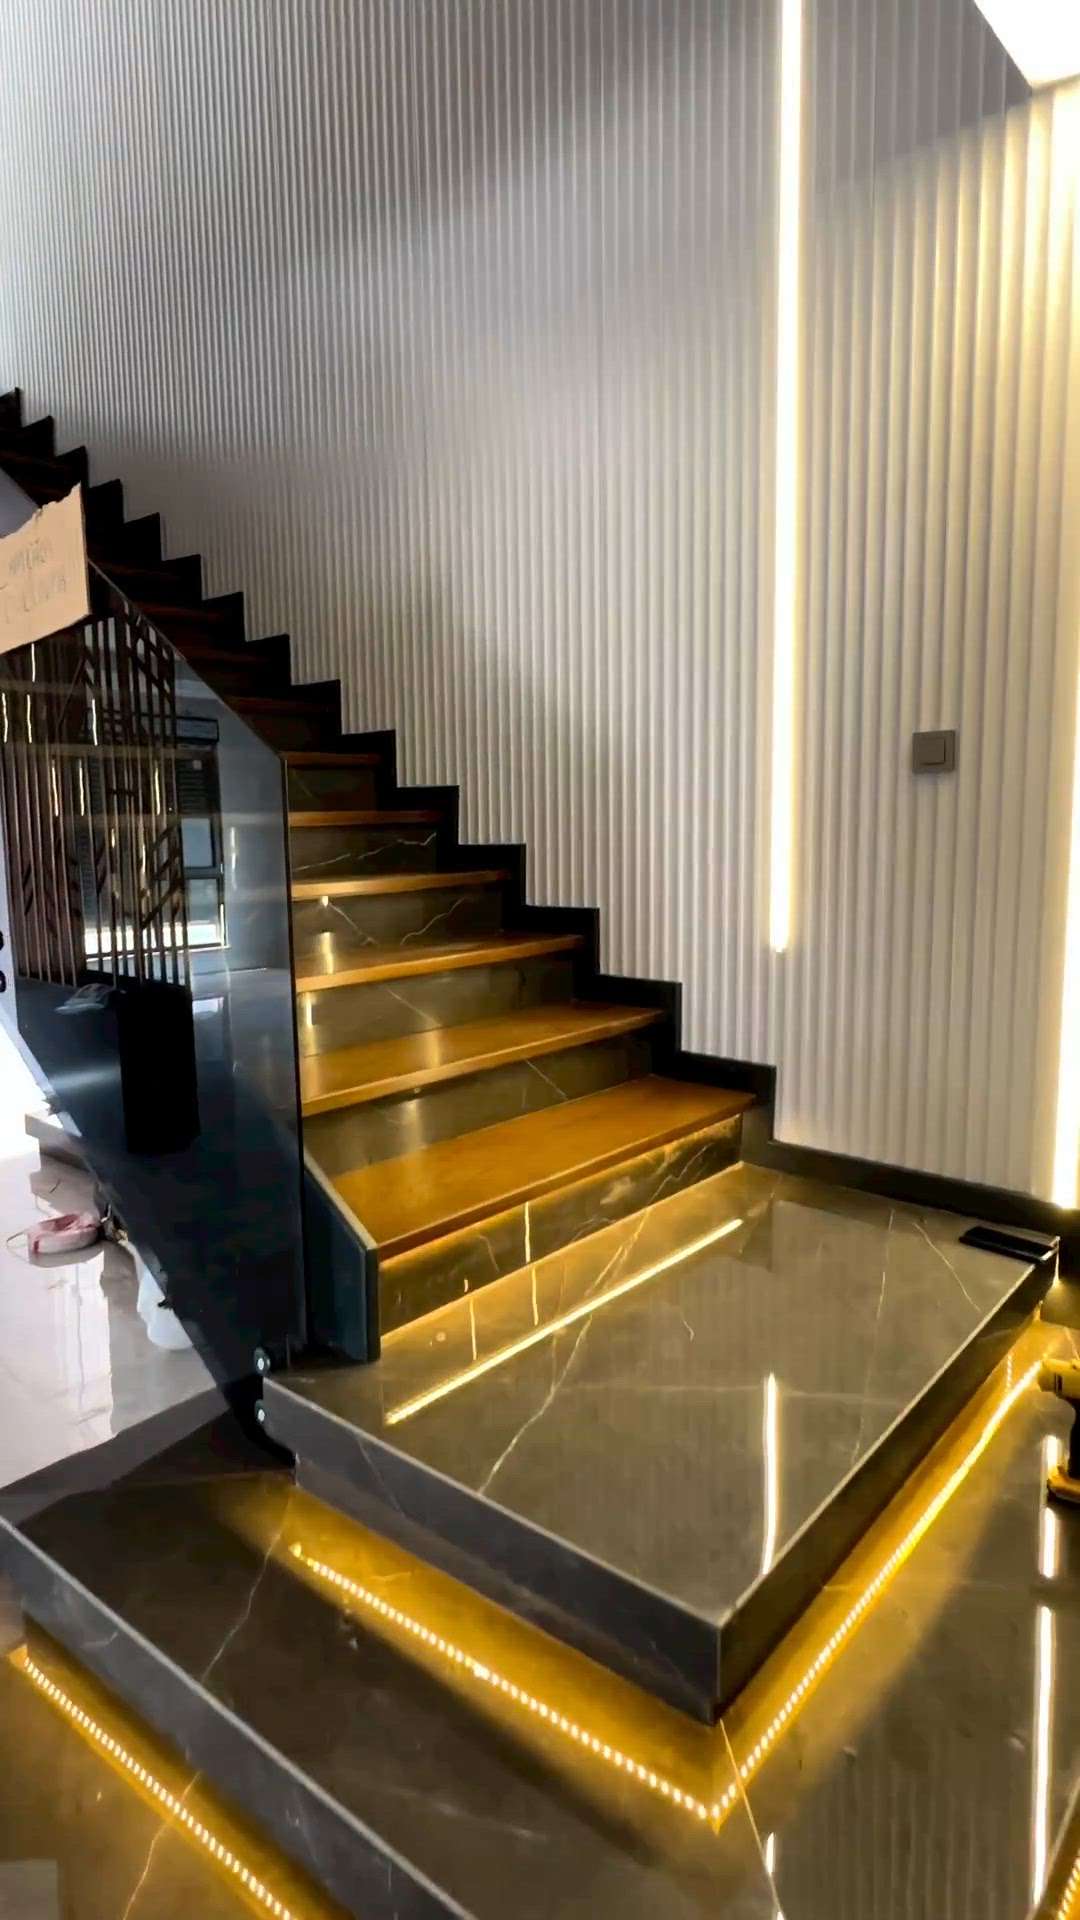 Stairs Design
.
.
CONTACT IF ANY REQUIREMENT FOR DESIGNING
.
.
#stairdesign #InteriorDesigner #HouseDesigns #designerhomes #HomeDecor